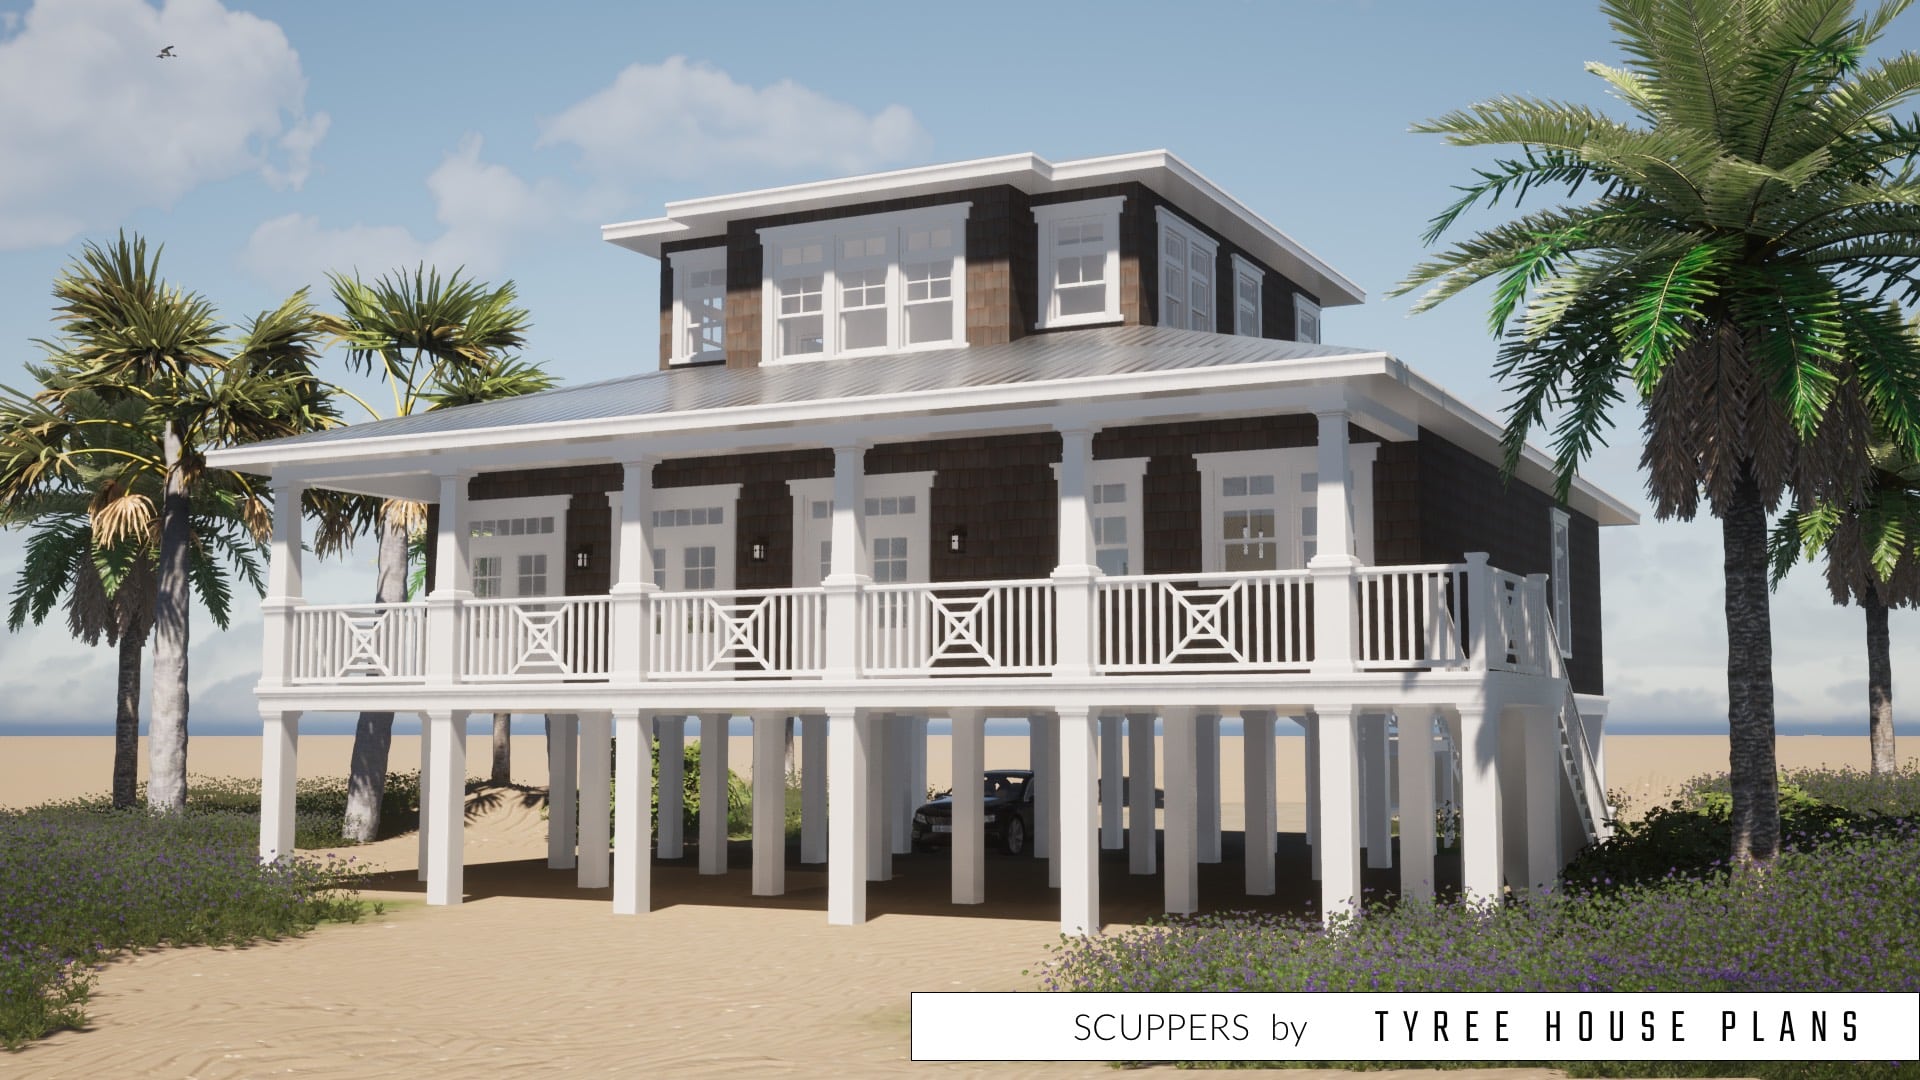 Scuppers by Tyree House Plans.